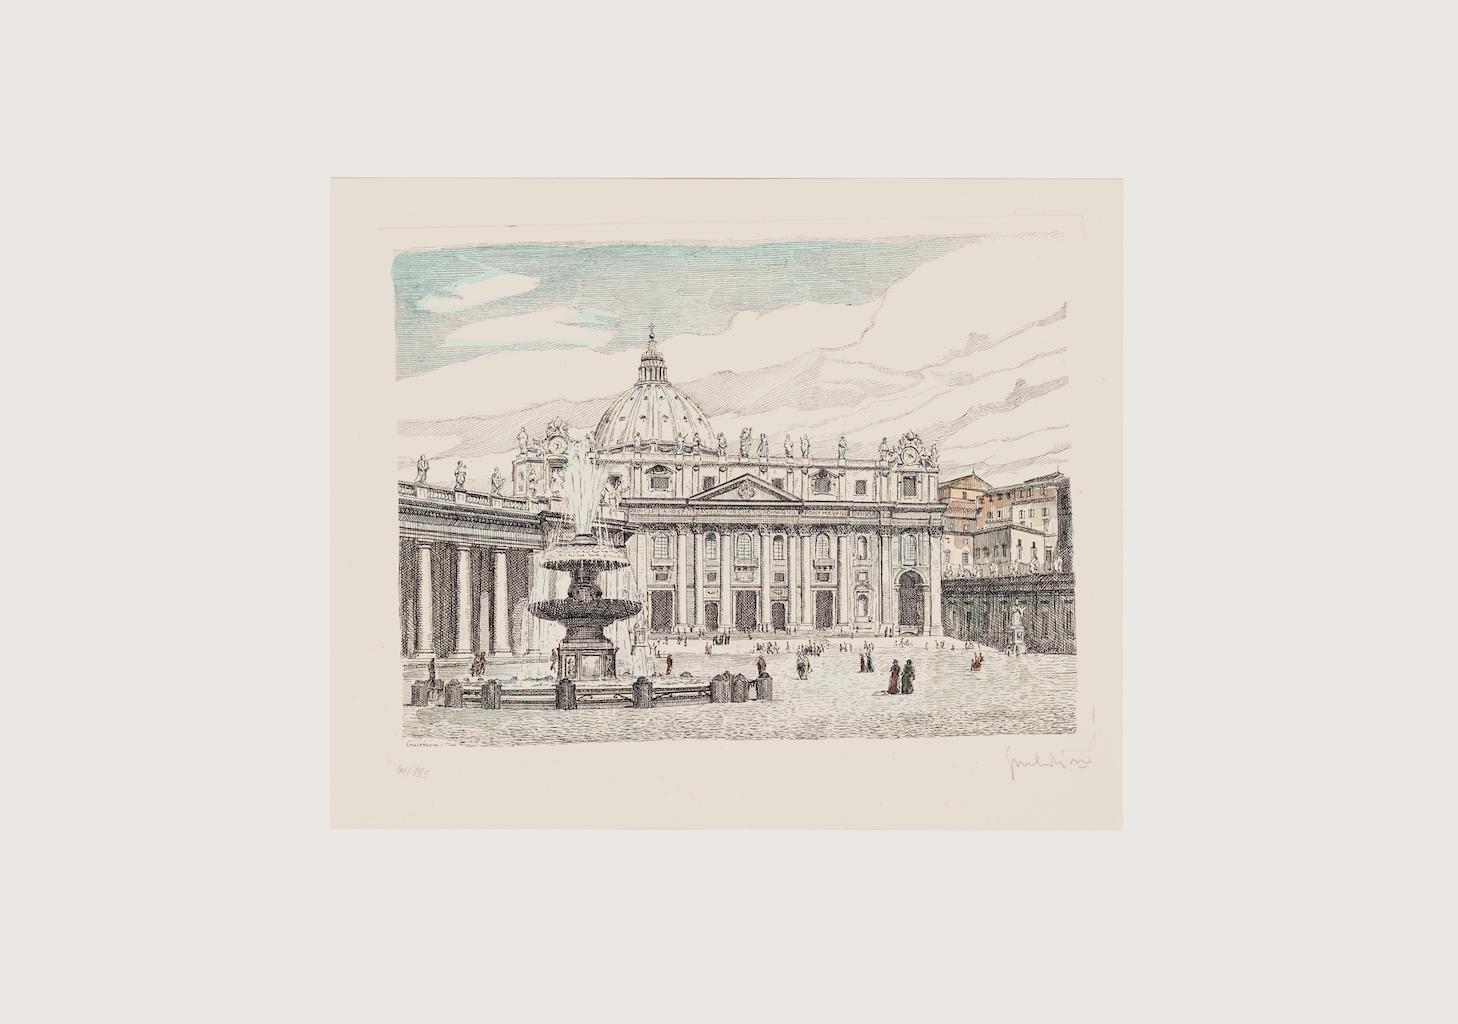 St. Peter's Square is an original etching artwork realized by the Italian artist Giuseppe Malandrino.

Hand-signed by the artist on the lower right in pencil.

Numbered in Roman numerals, edition o 47/199 prints.

Perfect conditions. 

Passepartout